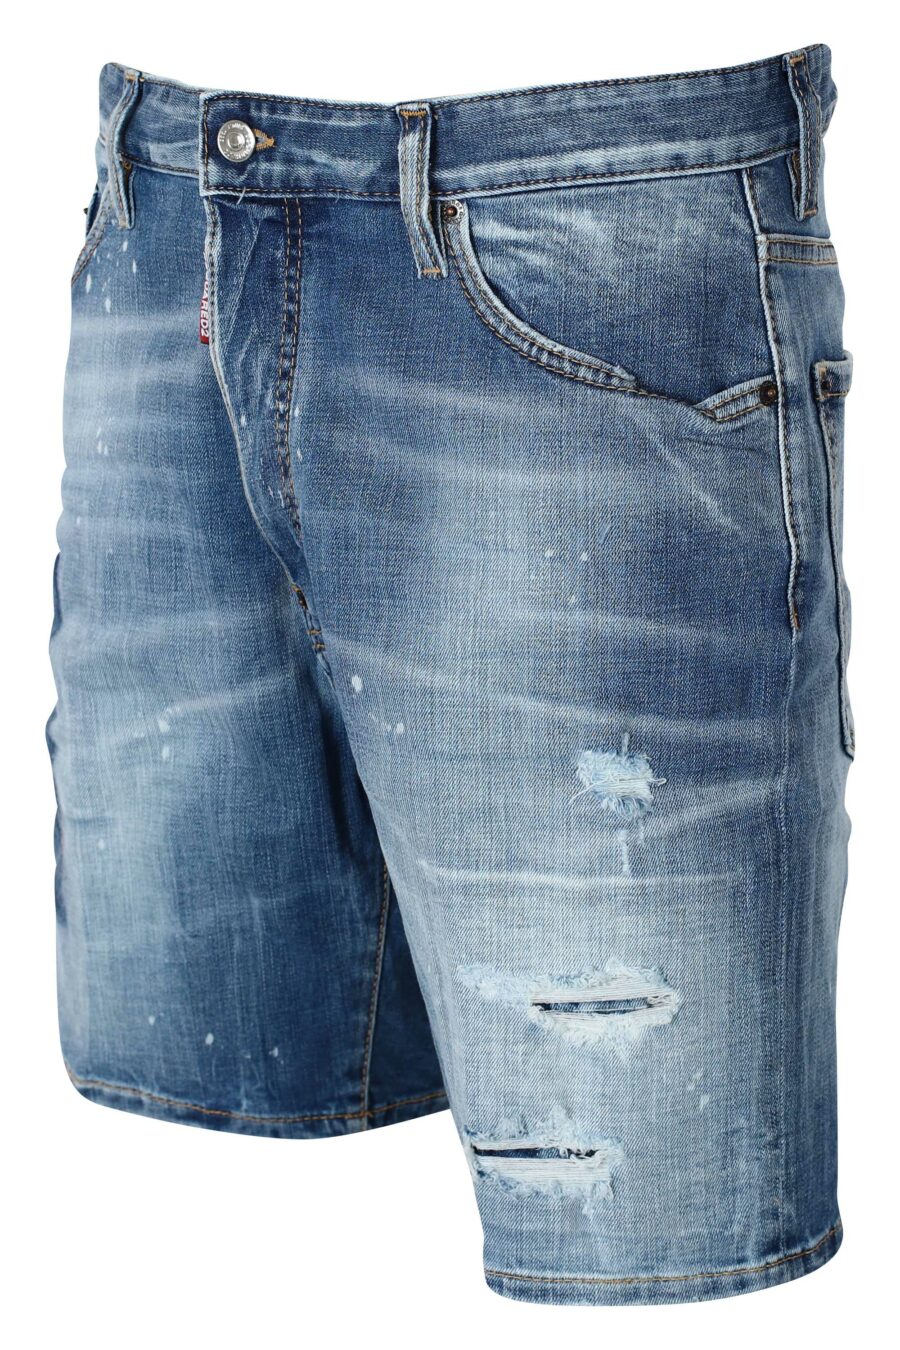 Blue denim shorts with patch and graphic print on the back - IMG 9594